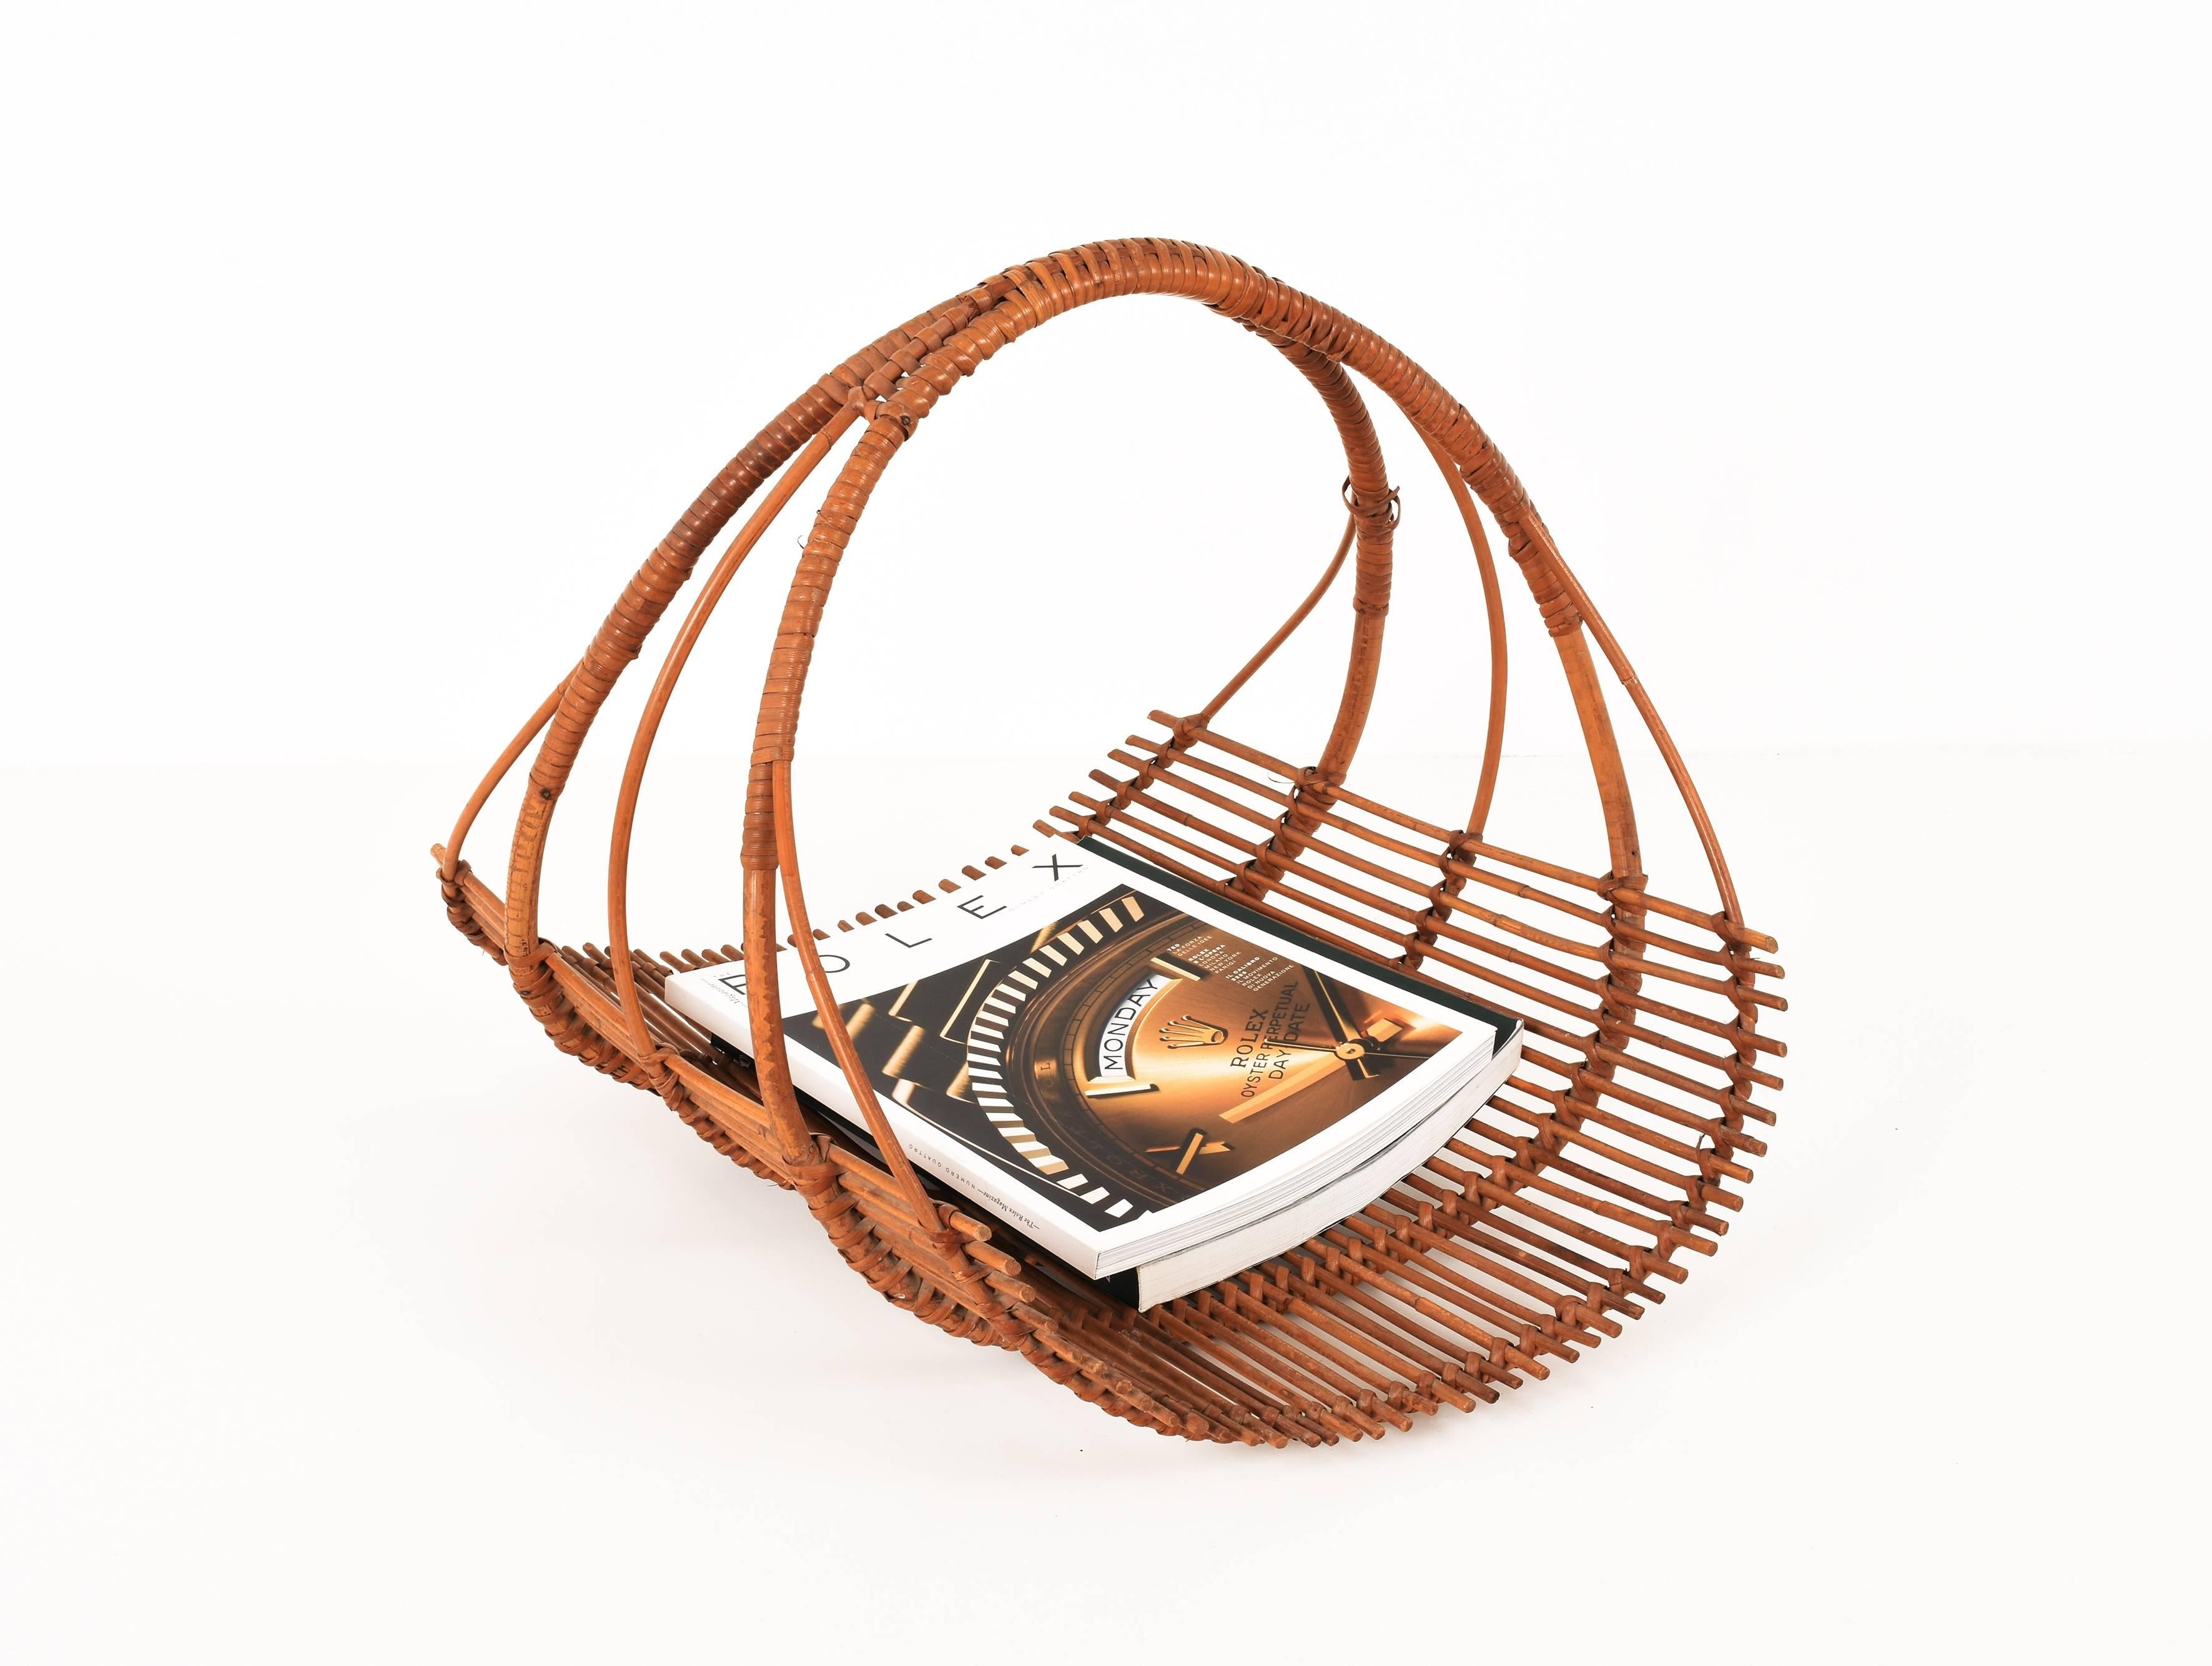 Midcentury French Riviera bamboo and rattan magazine rack.

This item was produced in Italy during the 1960s.

An astonishing piece that will enrich a midcentury-style living room or studio.